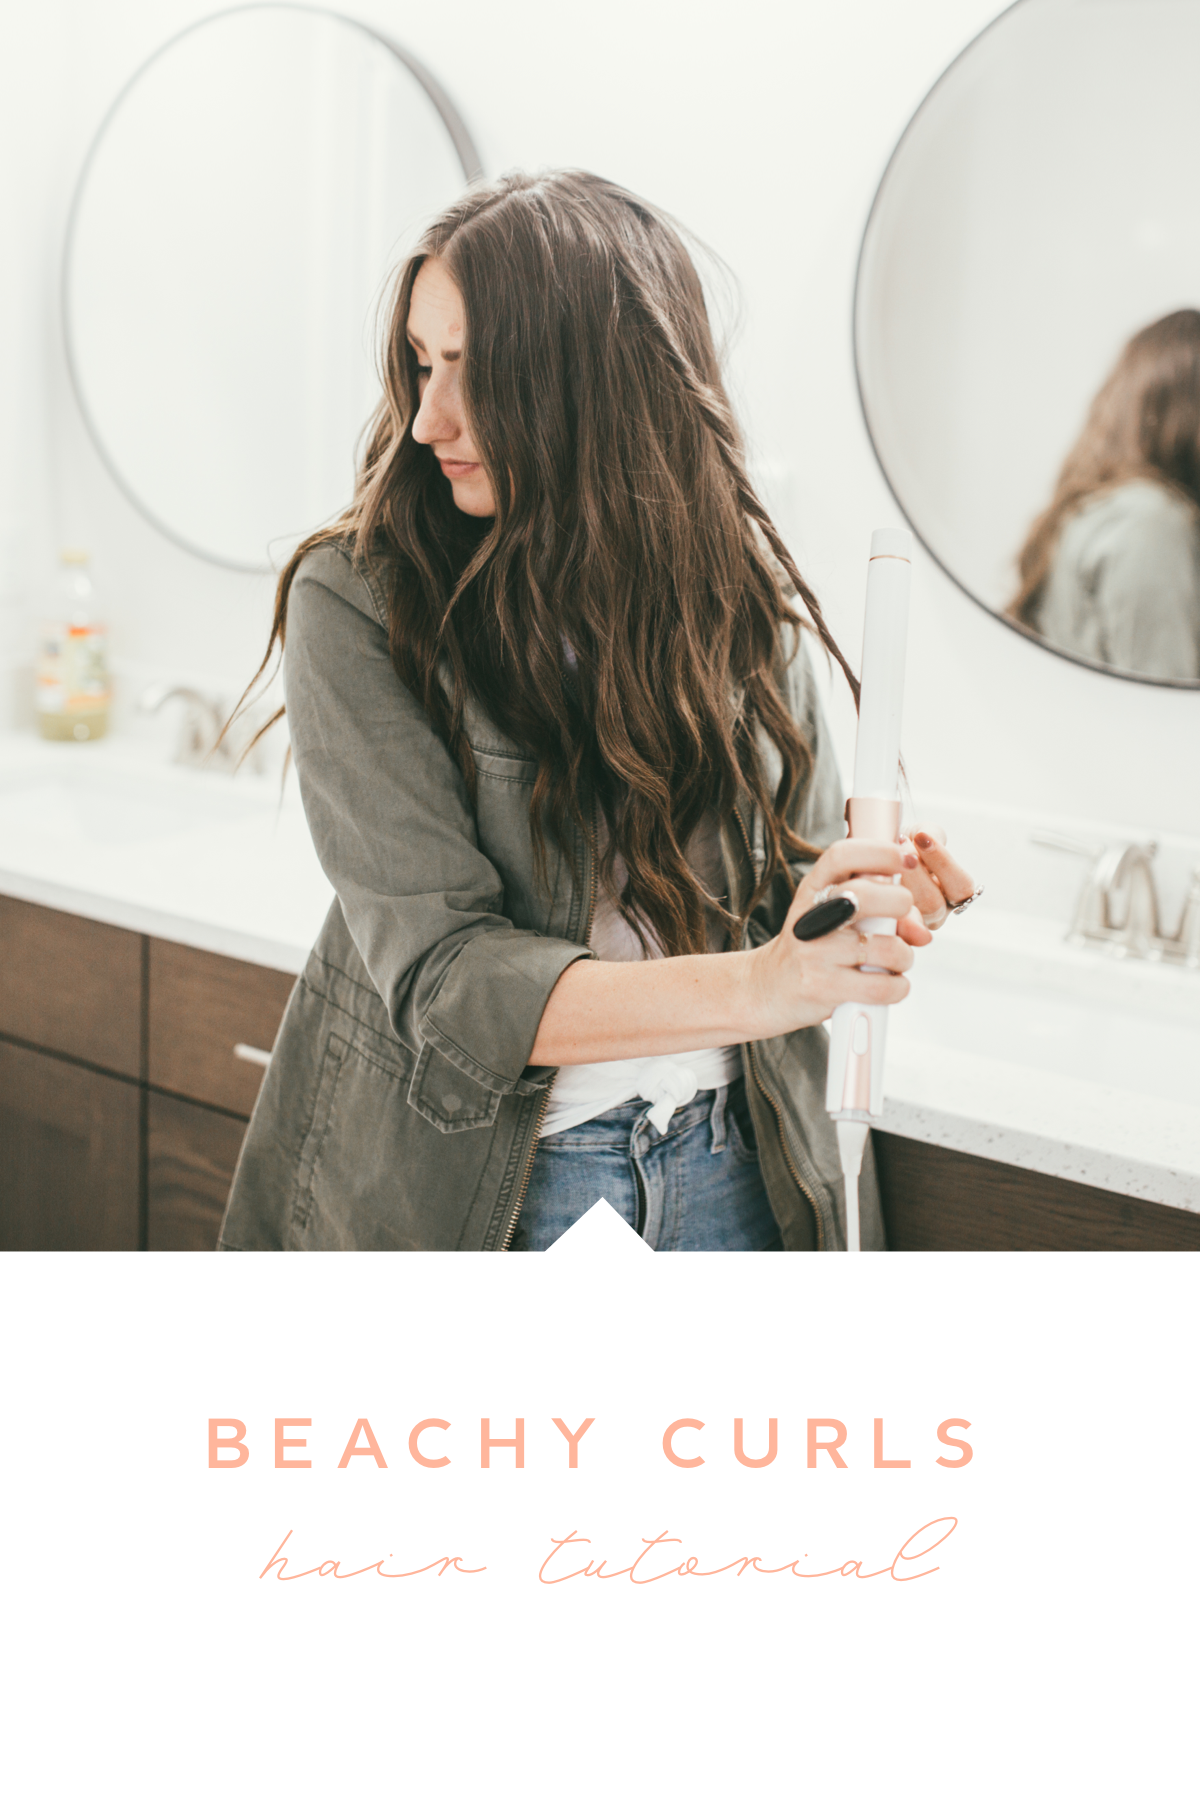 Curious how to get the perfect beachy curls? Utah Style blogger Dani Marie is sharing the best beachy curls hair tutorial here!